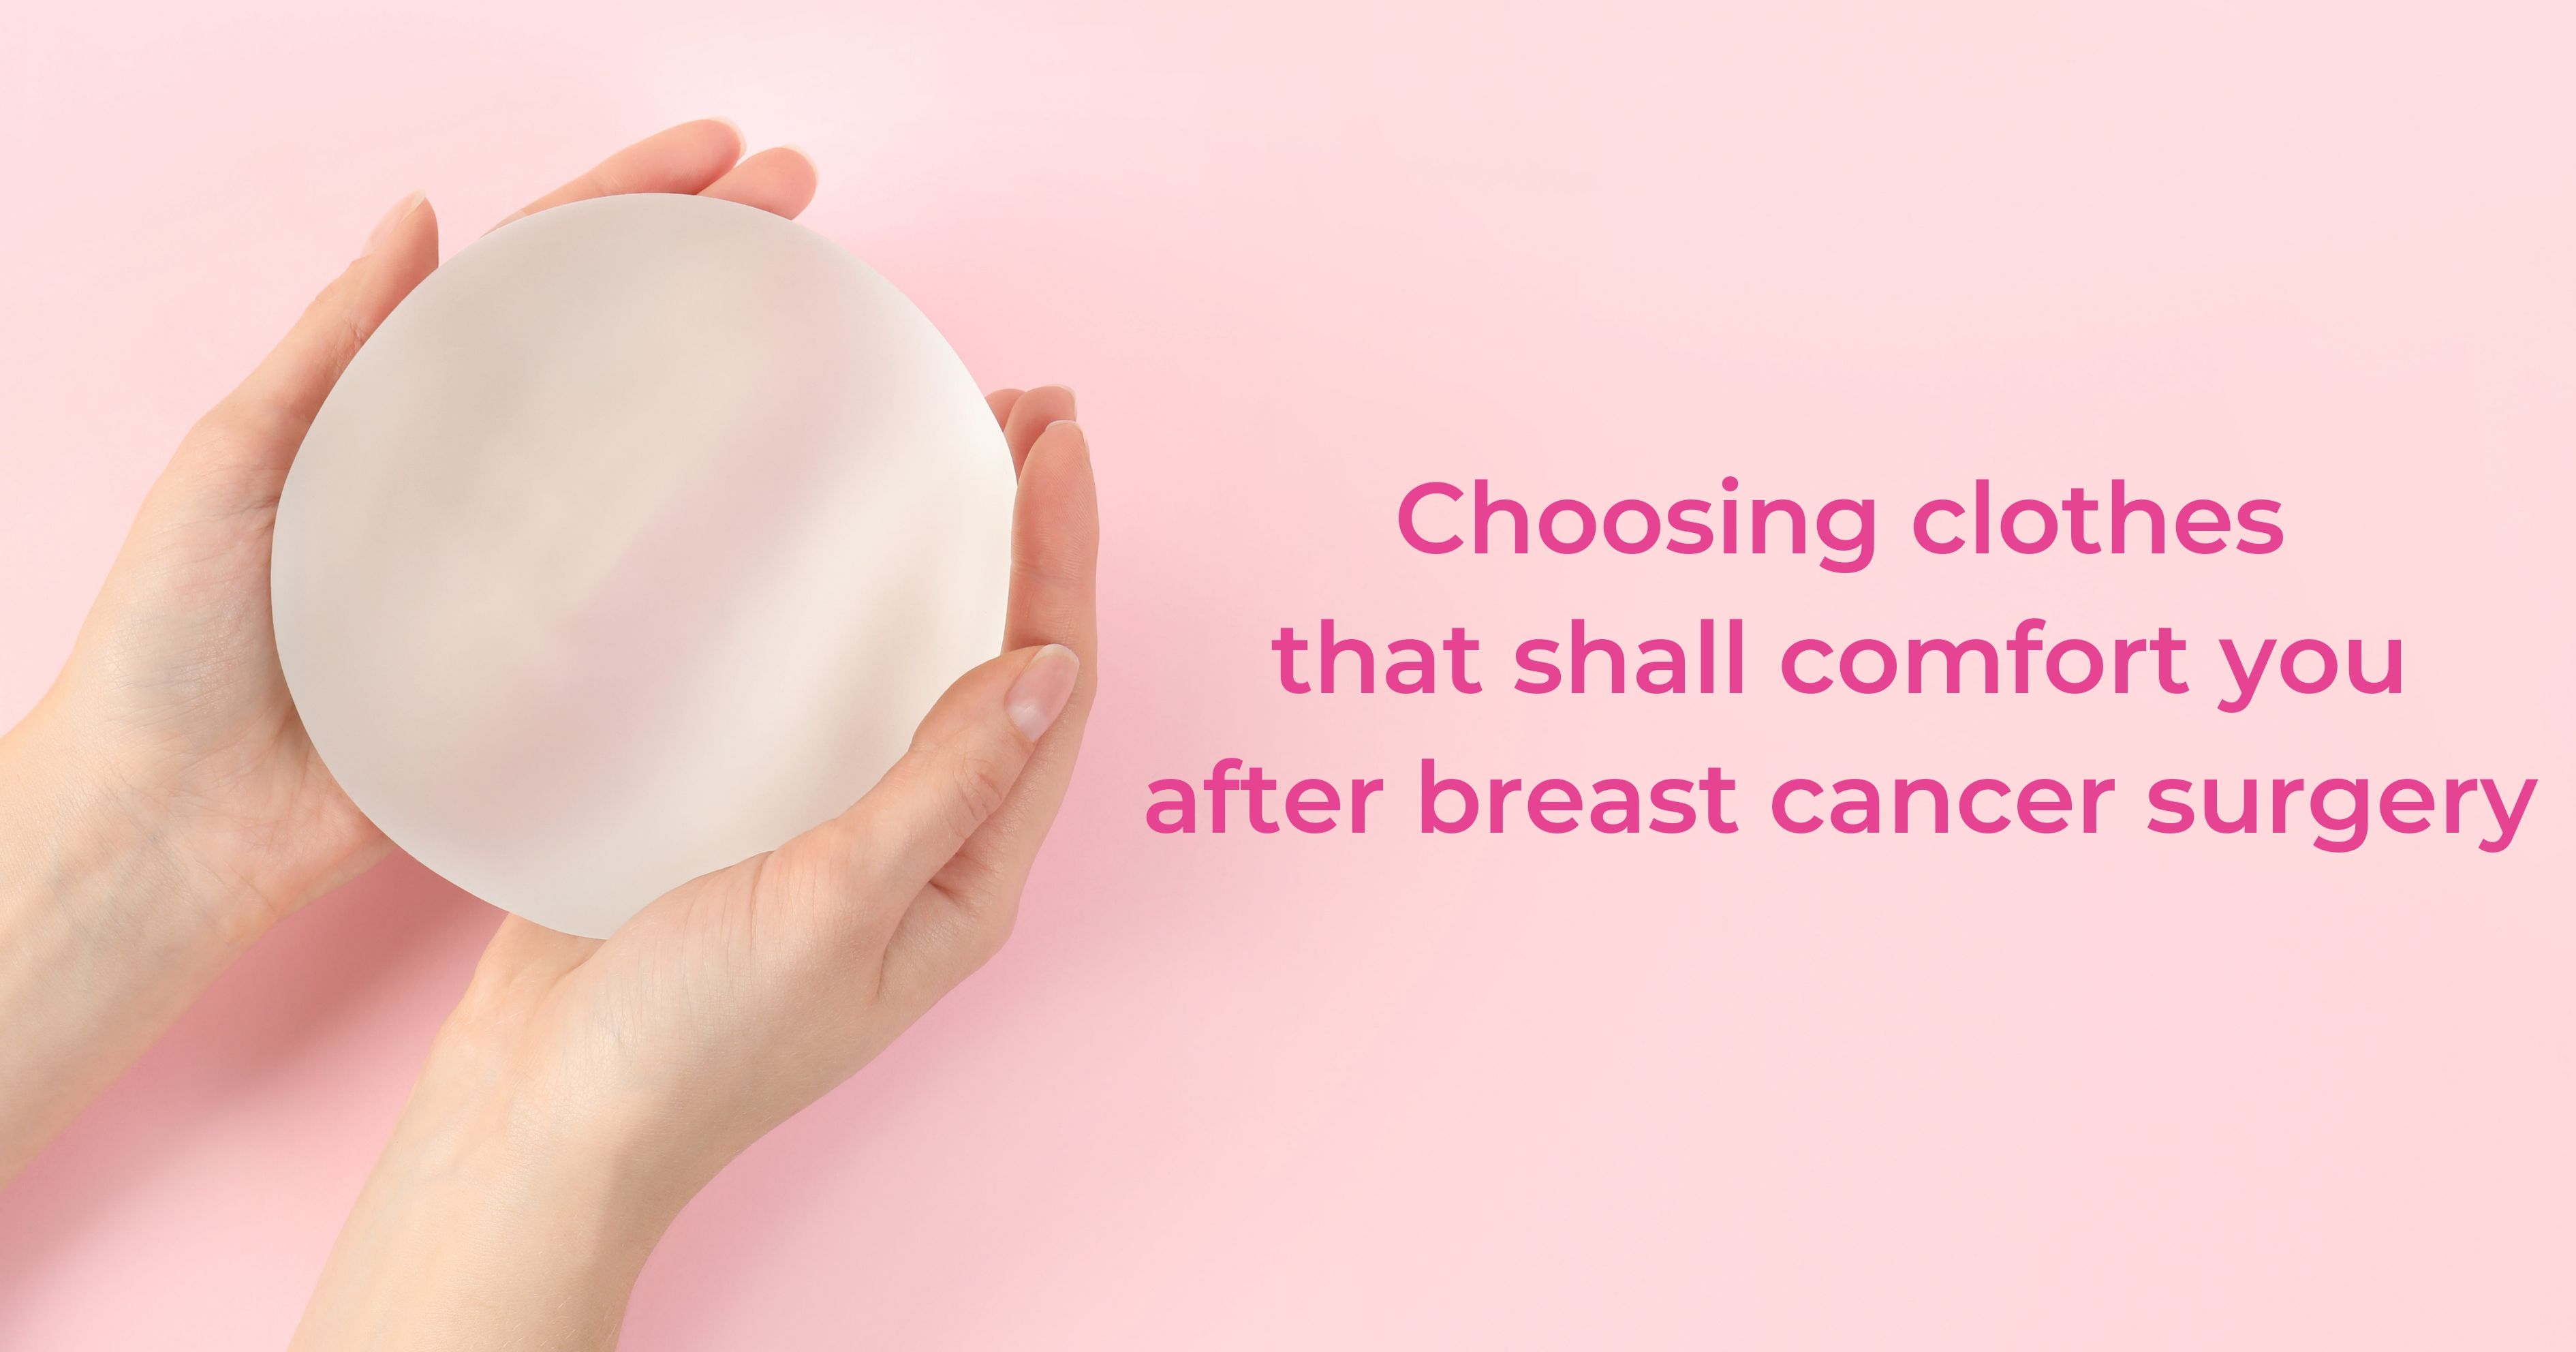 Breast prostheses, bras and clothes after surgery